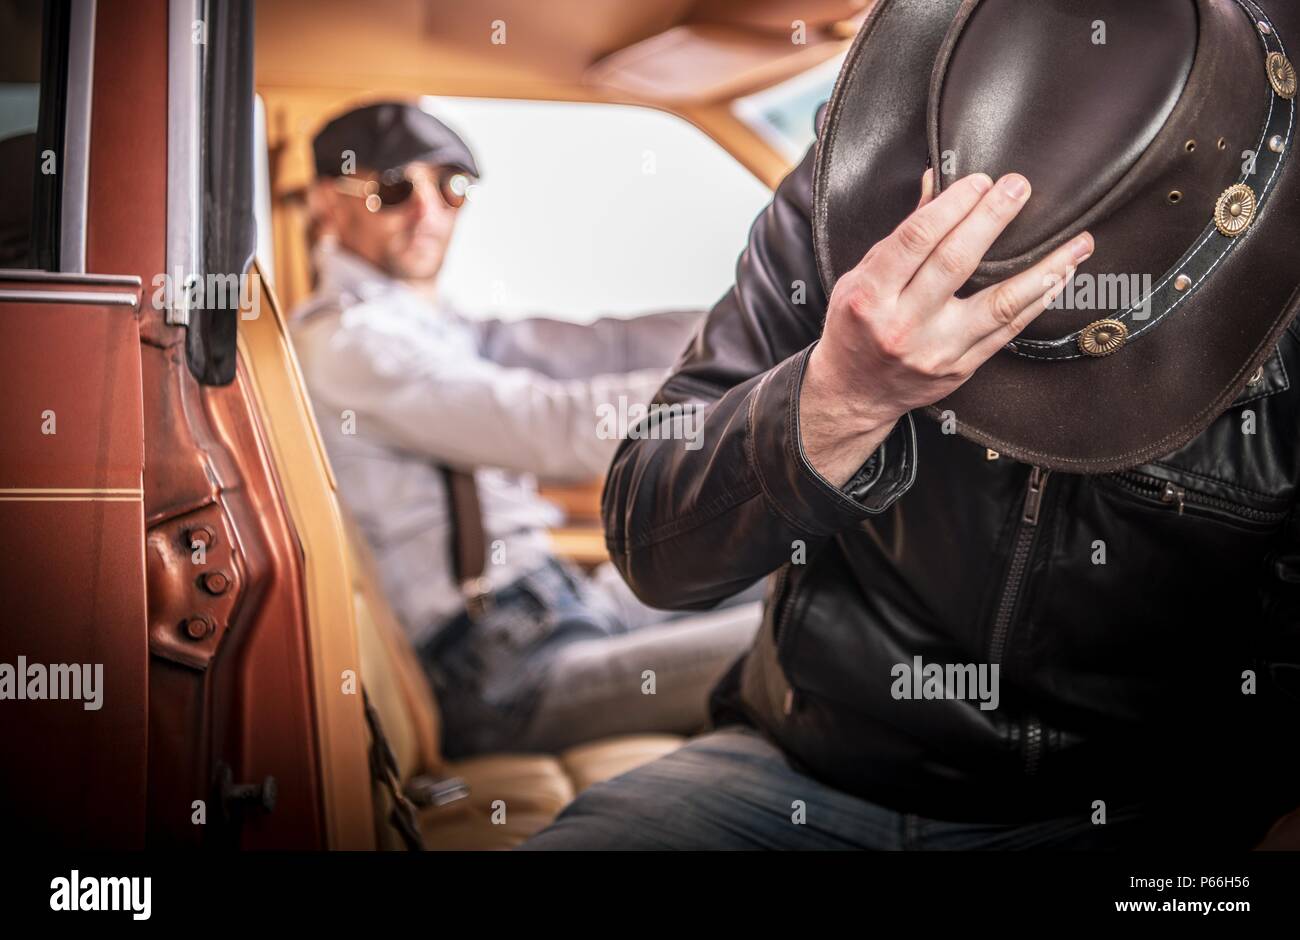 Picking Up Strange and Drunk Hitchhiker in Cowboy Hat. Transportation Theme. Stock Photo